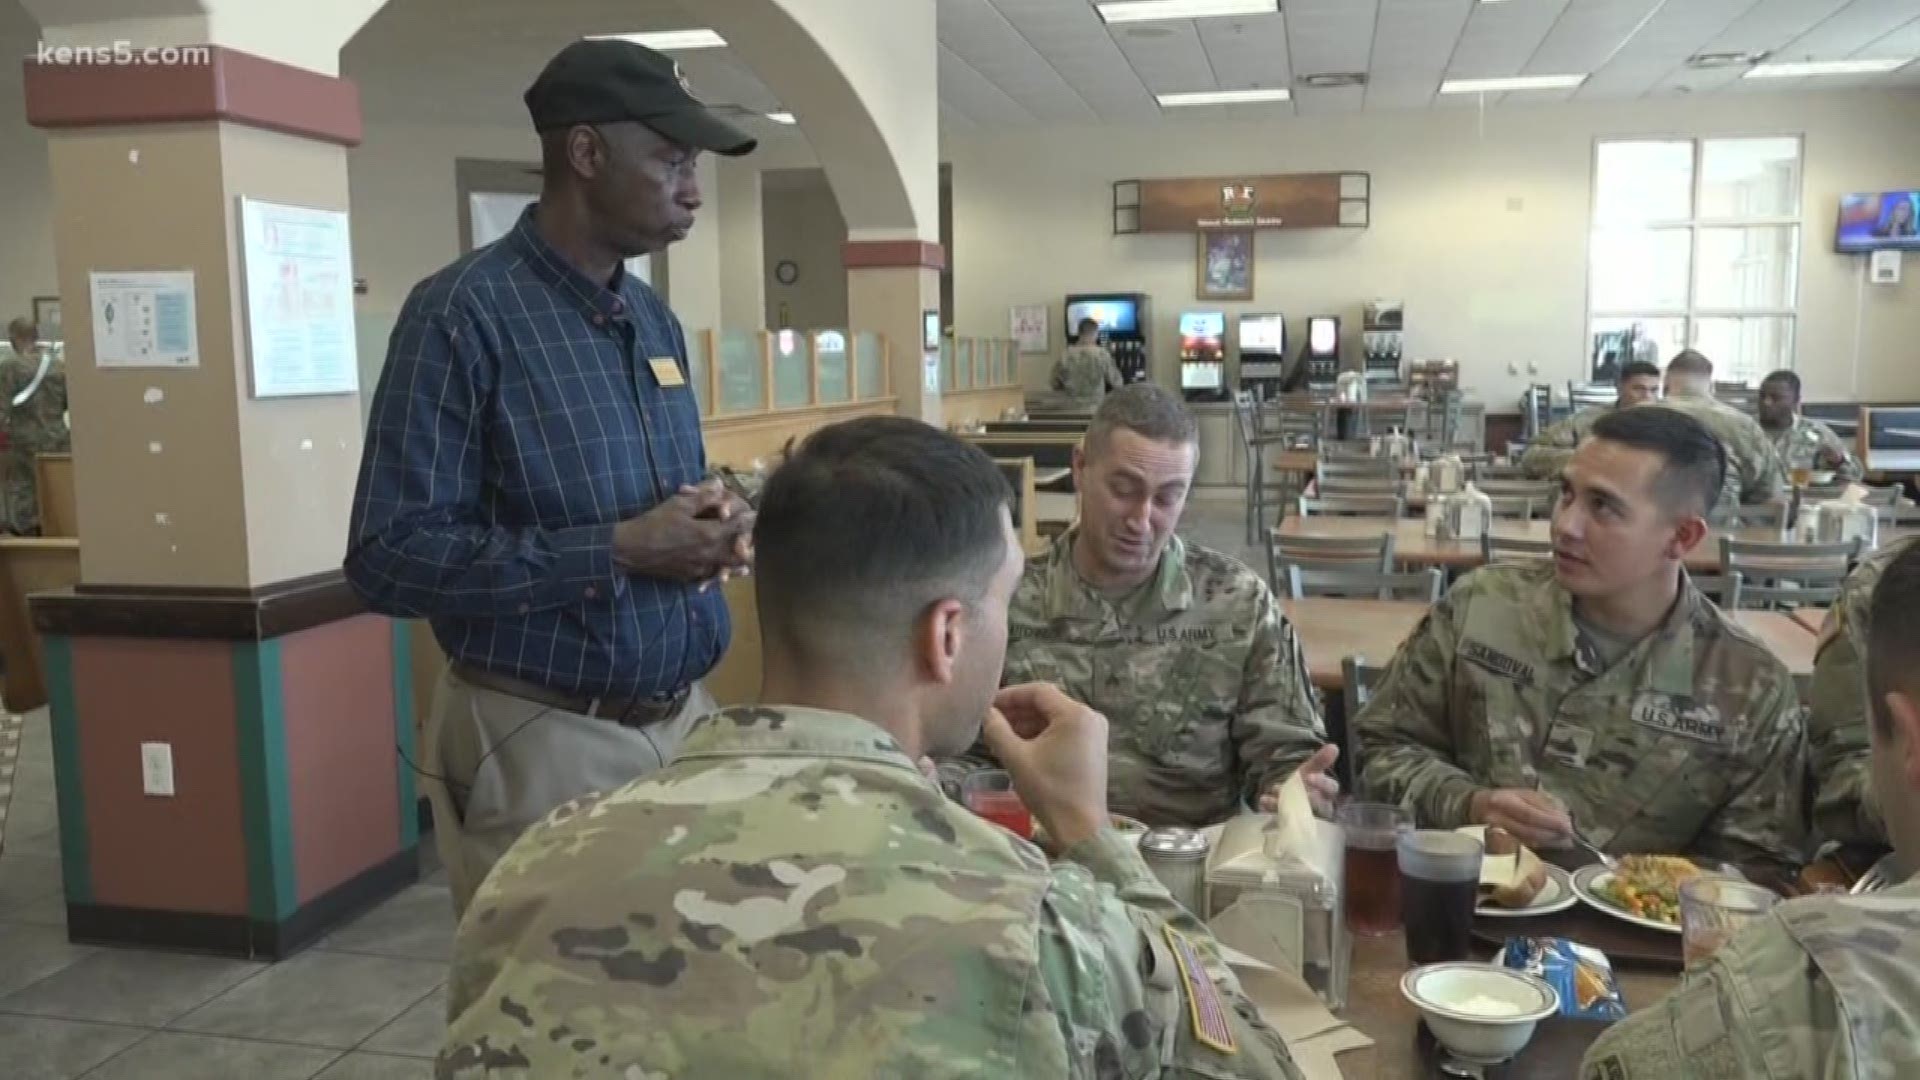 A good meal can do wonders! At the dining halls for our servicemen, there's one man who's dishing up plates of comfort for hard times.